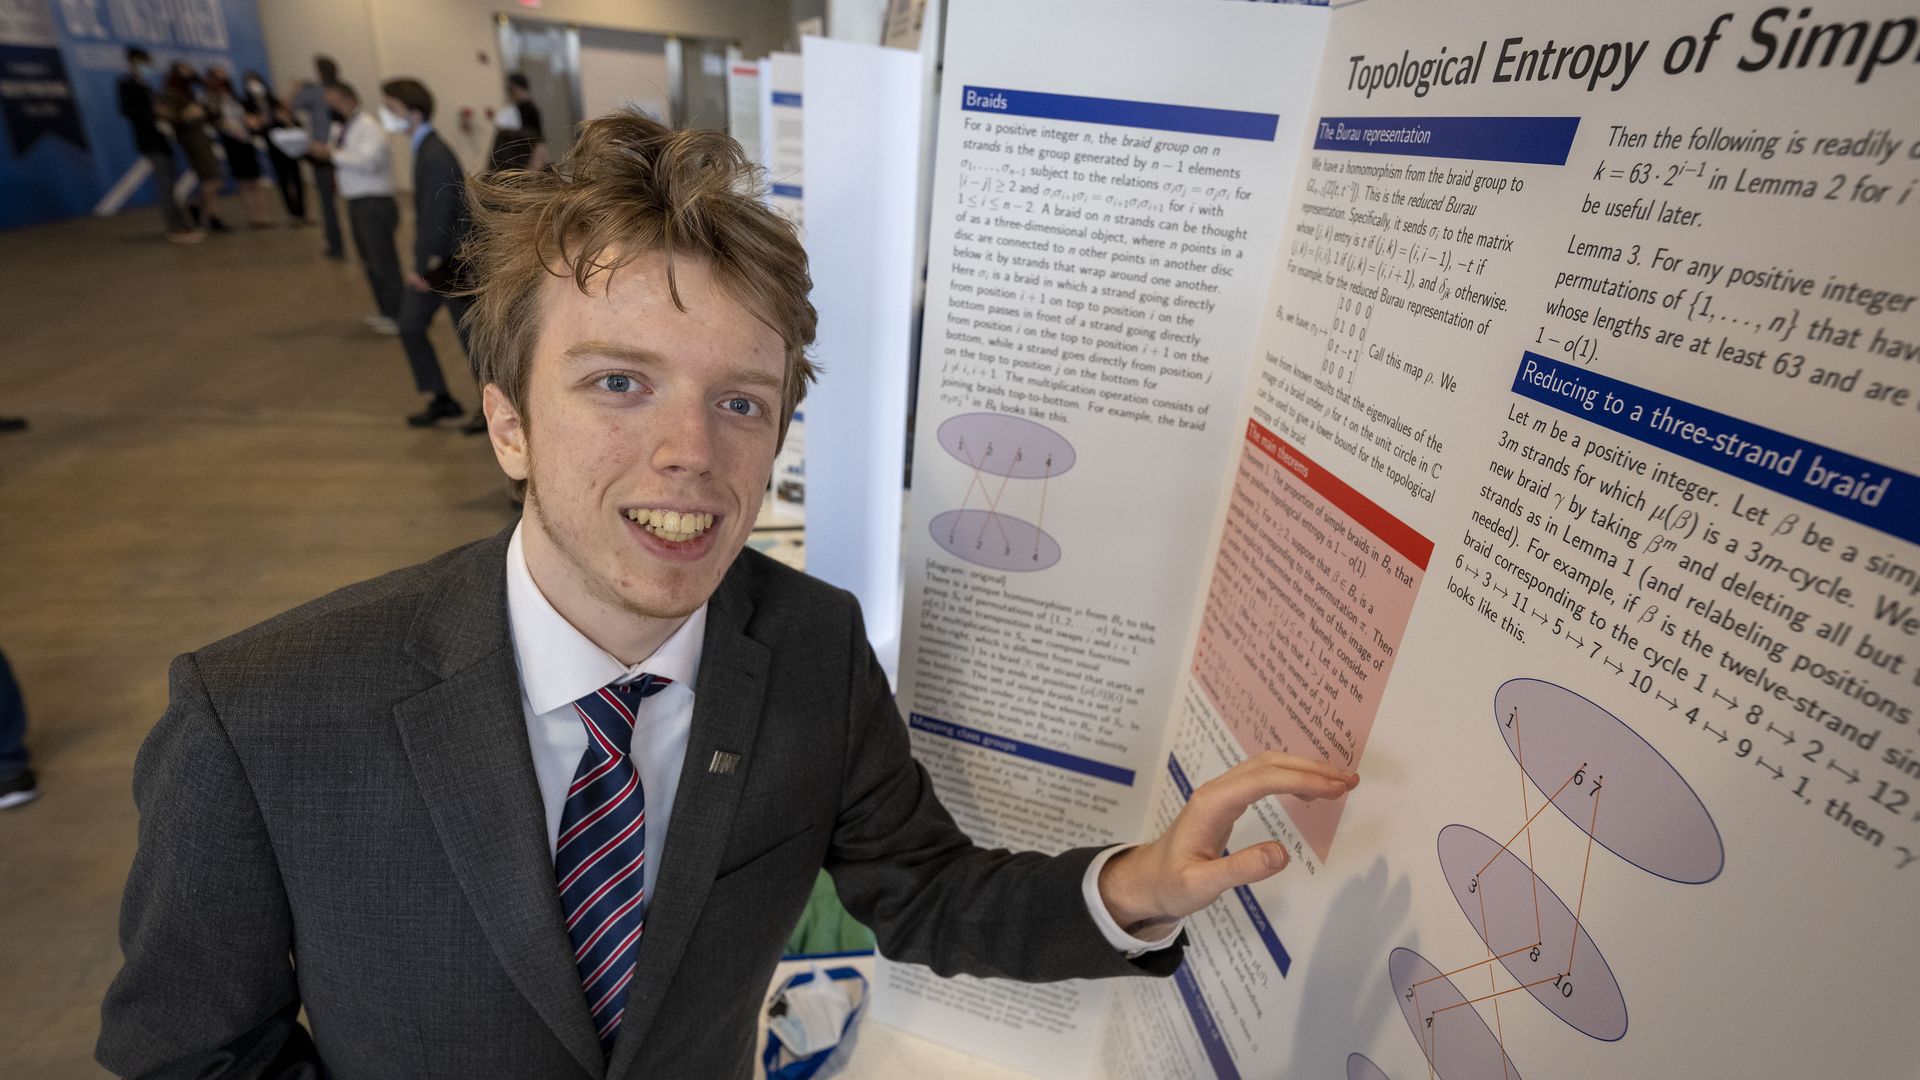 A young man stands next to a tri-fold science project